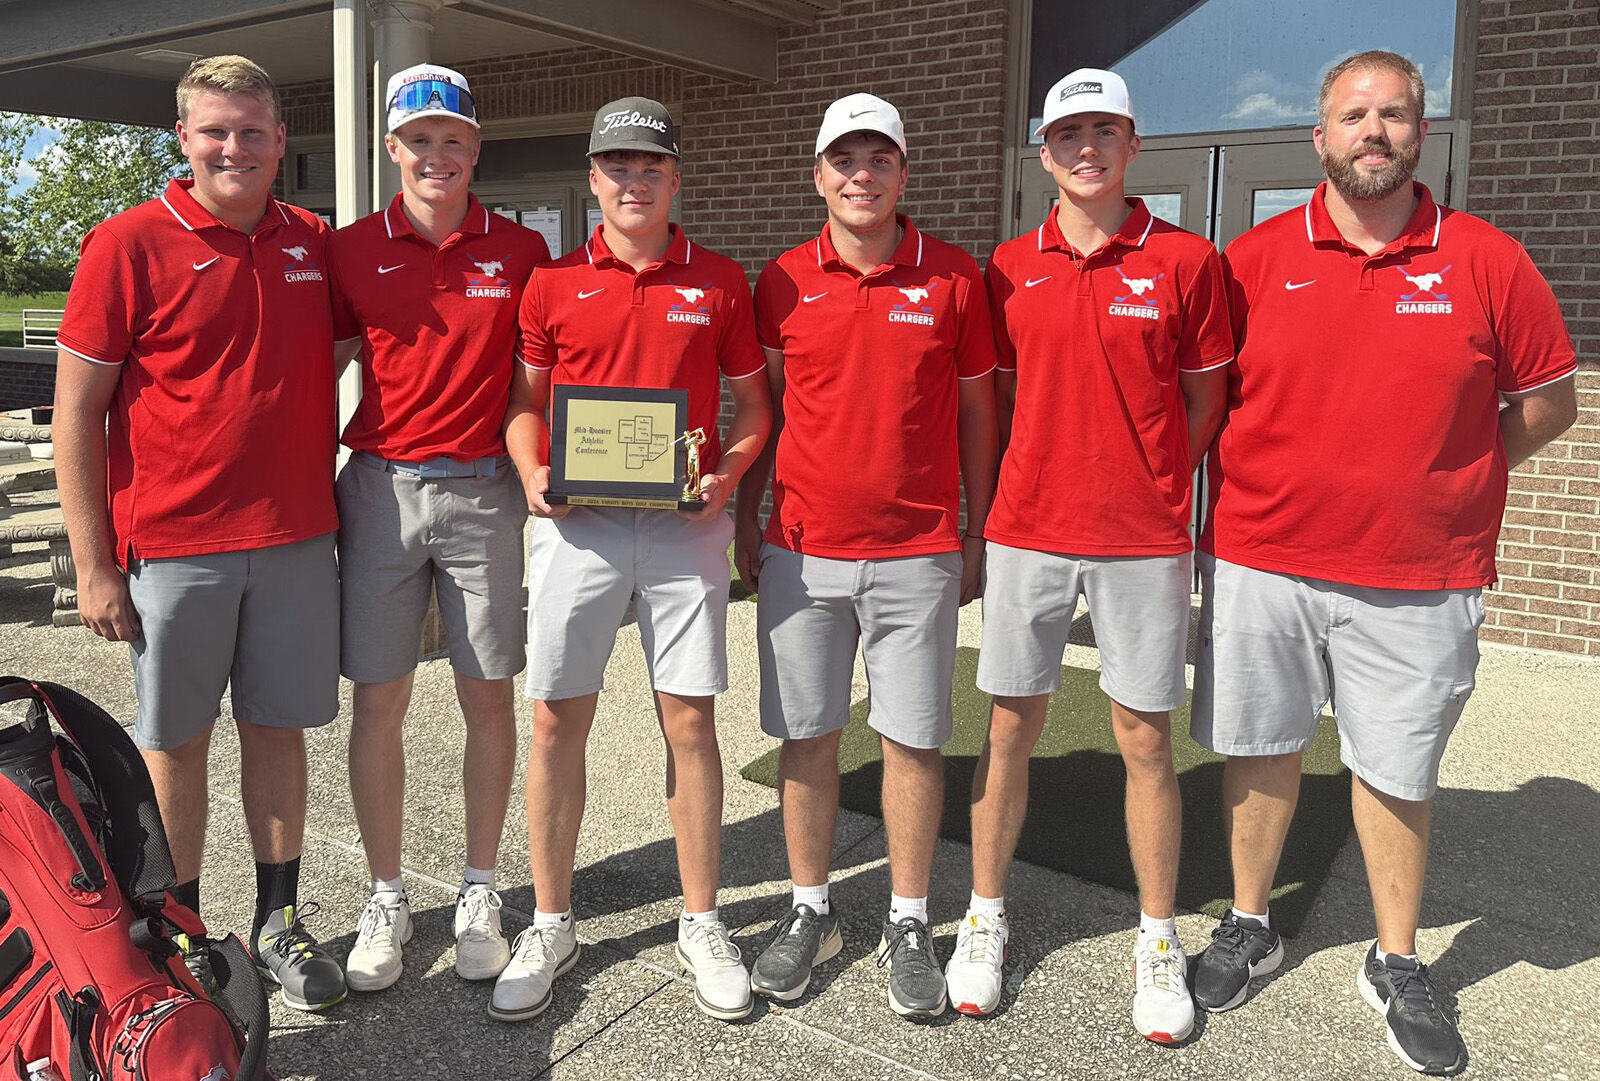 North Decatur Secures 4th Consecutive MHC Golf Title with Impressive Performance